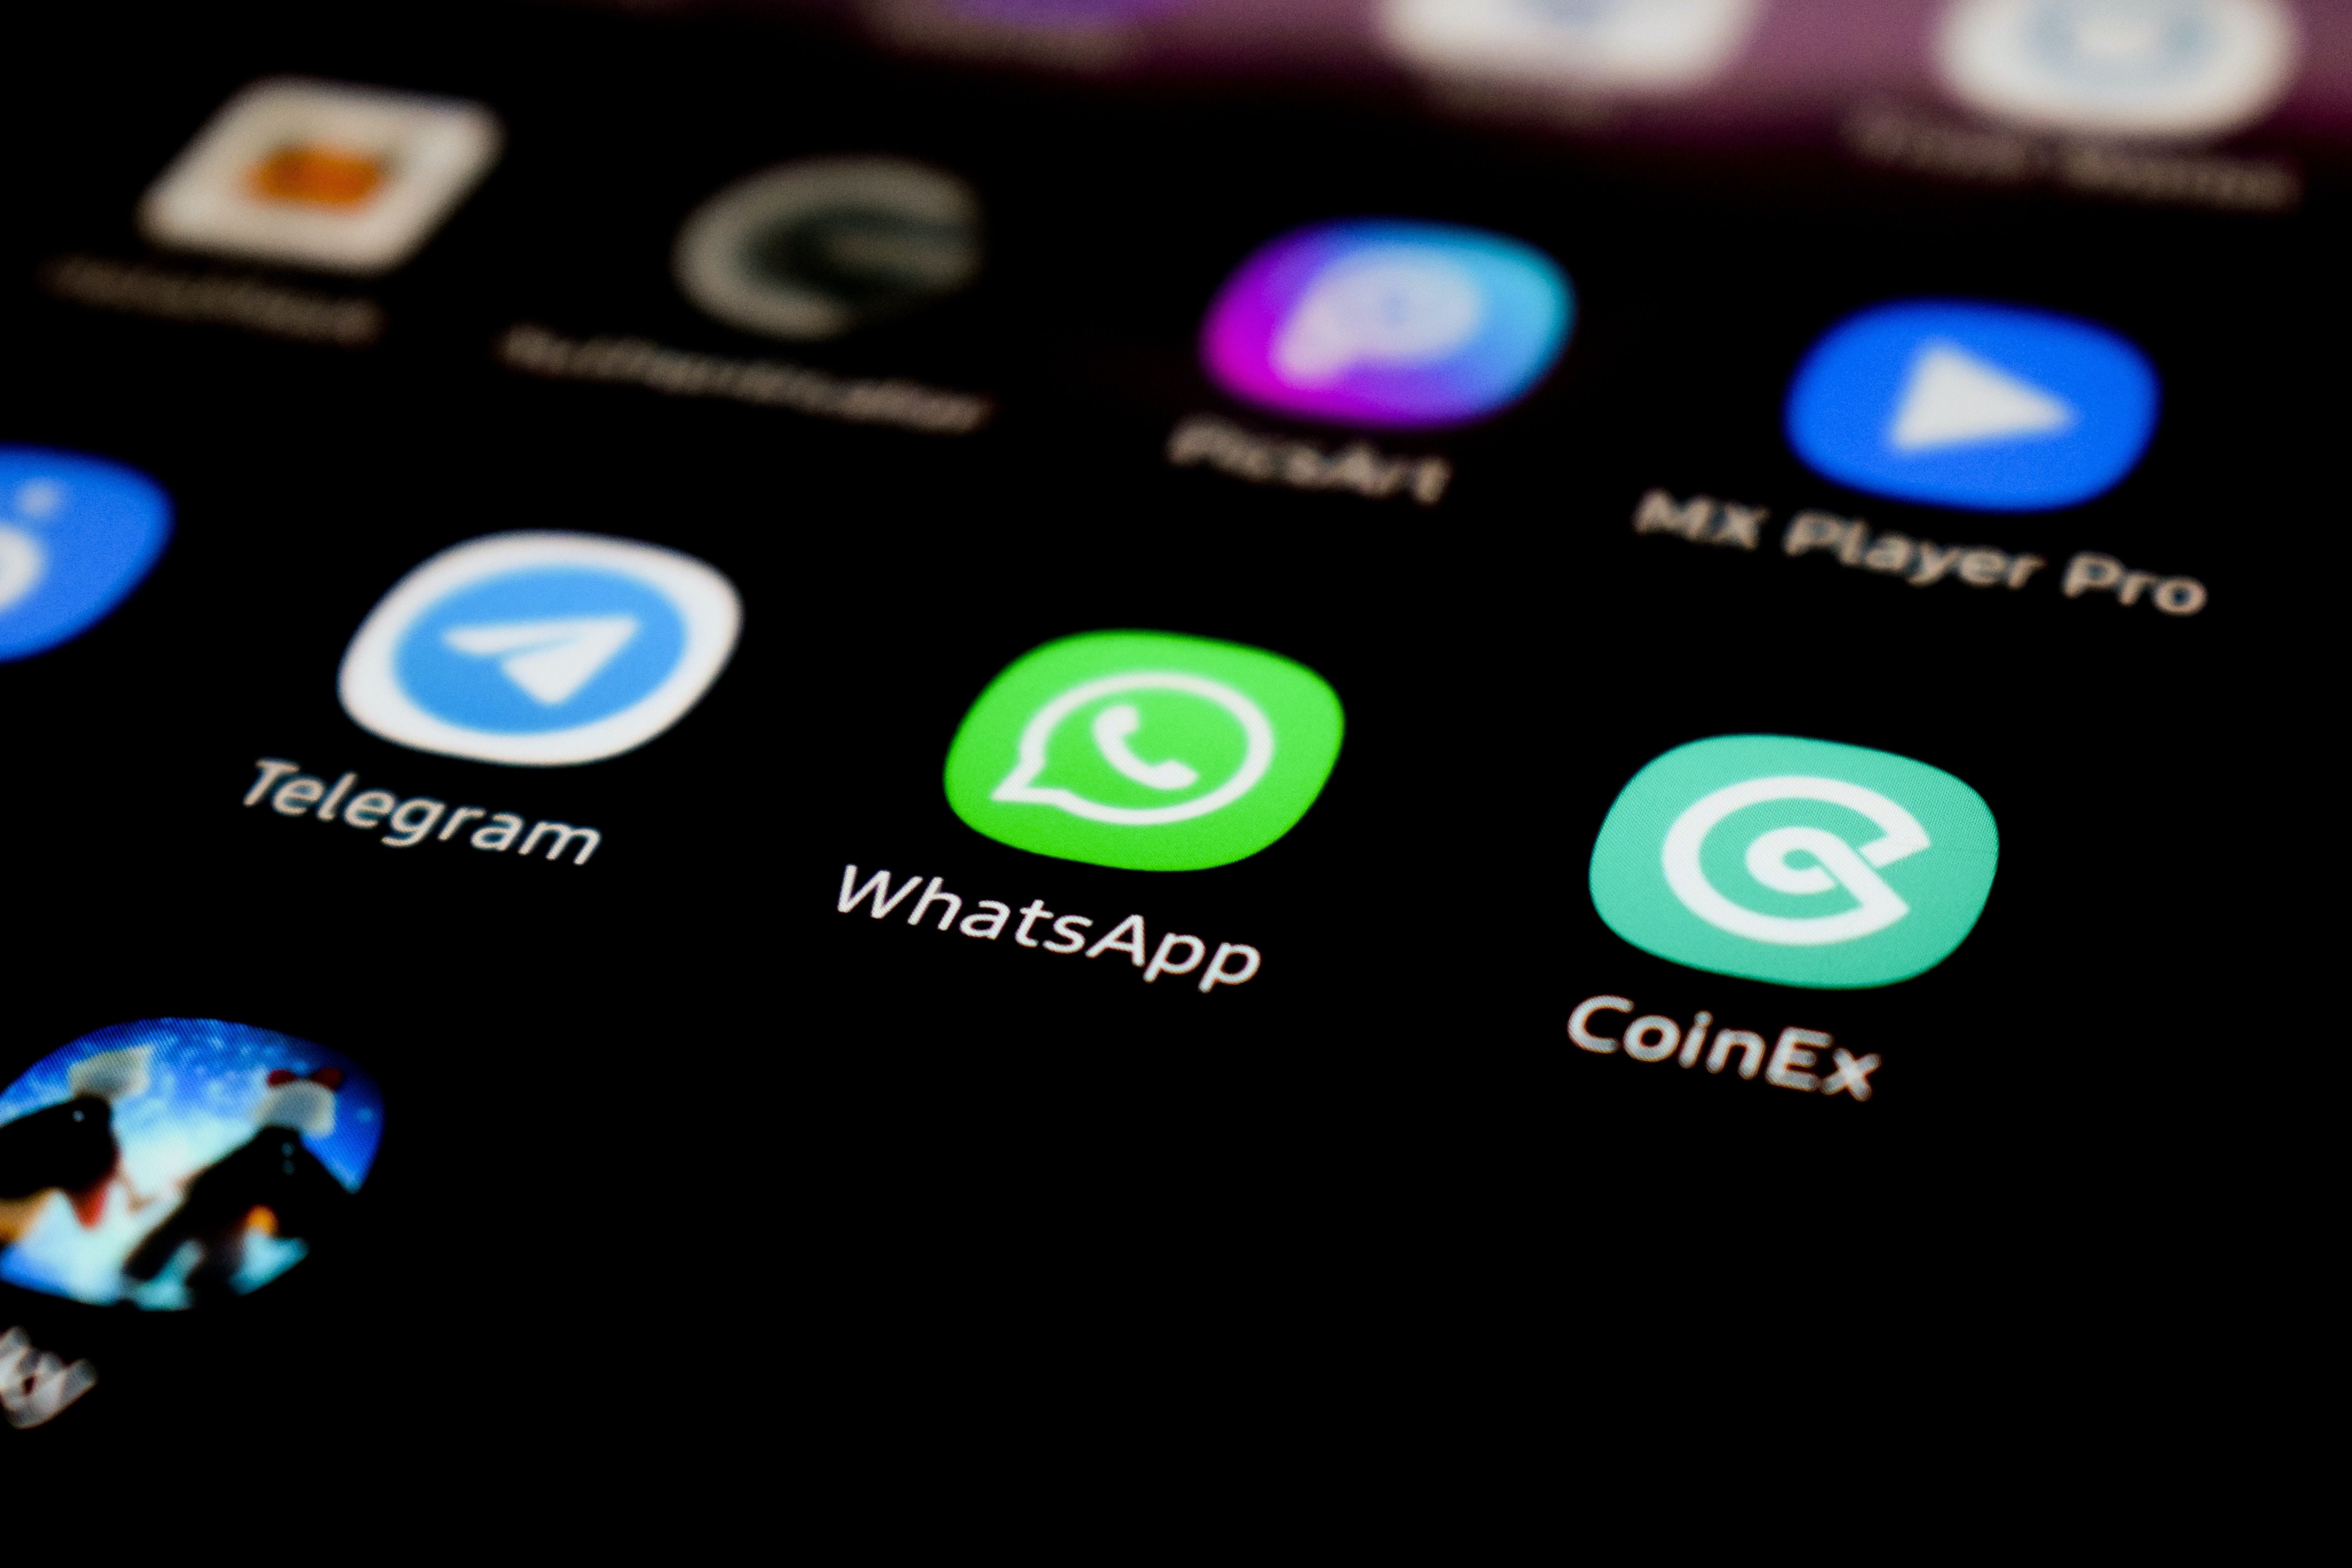 How To Restore WhatsApp Messages